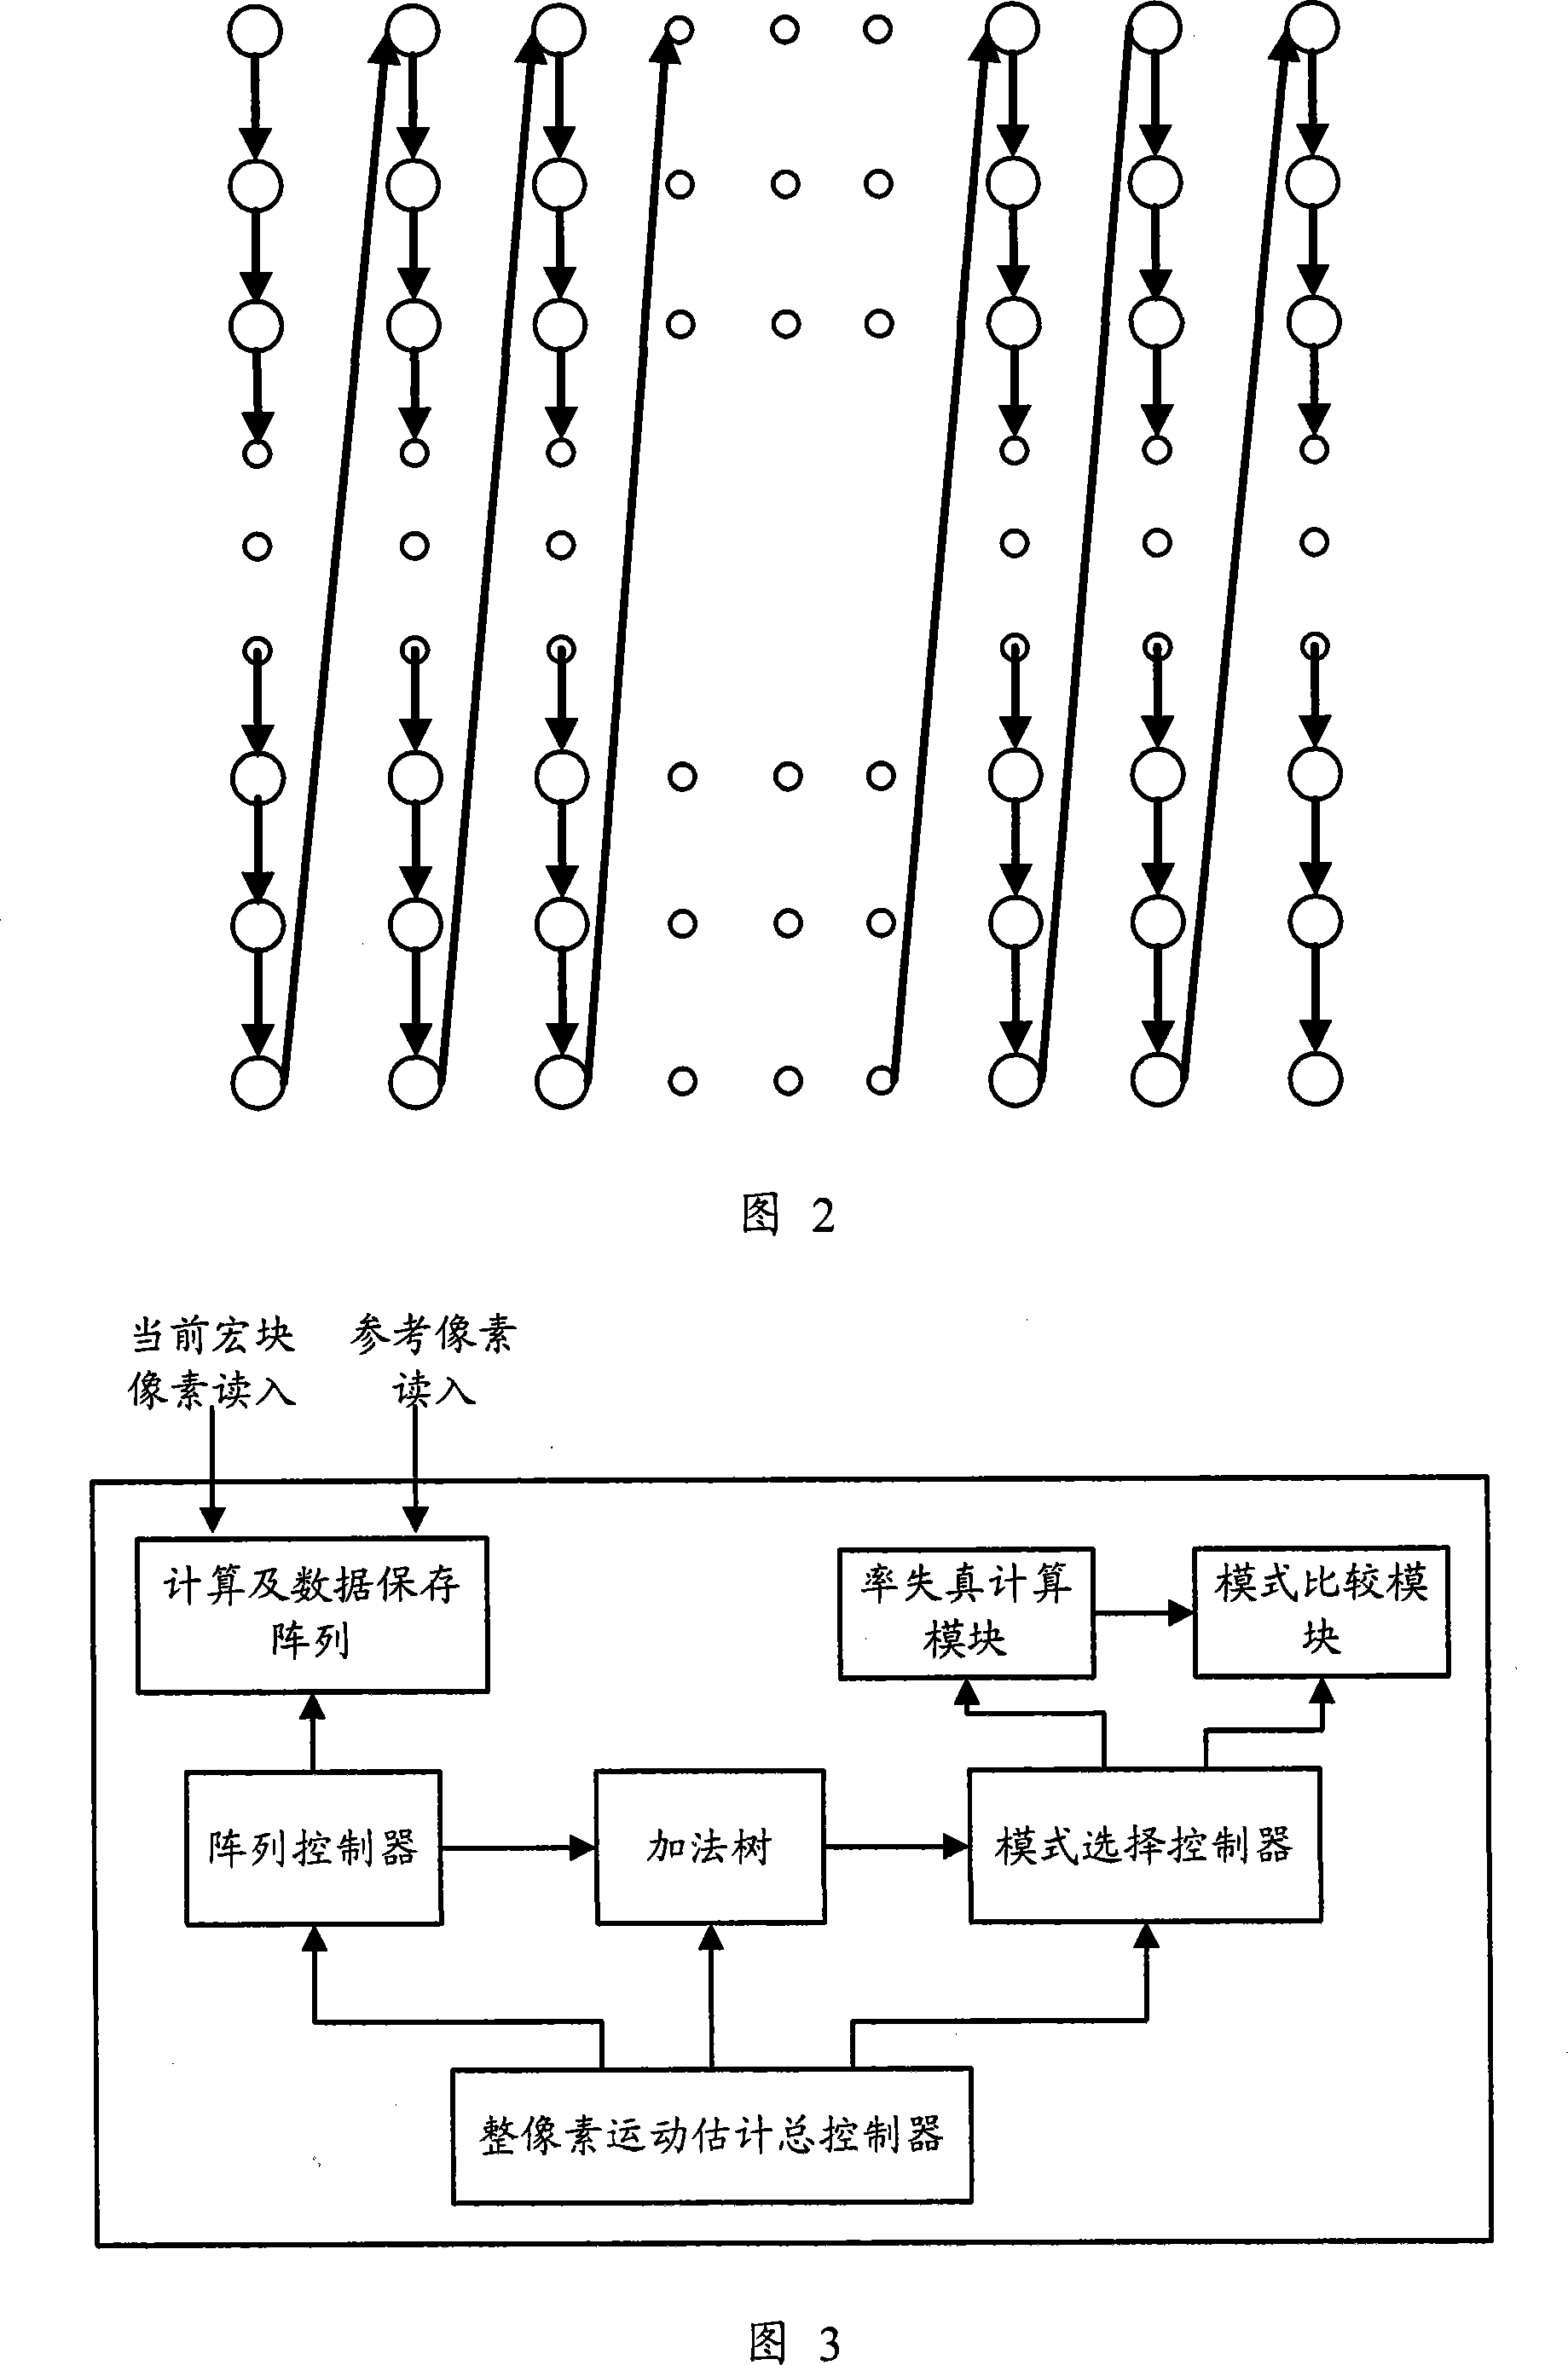 AVS-based motion estimation apparatus and searching method